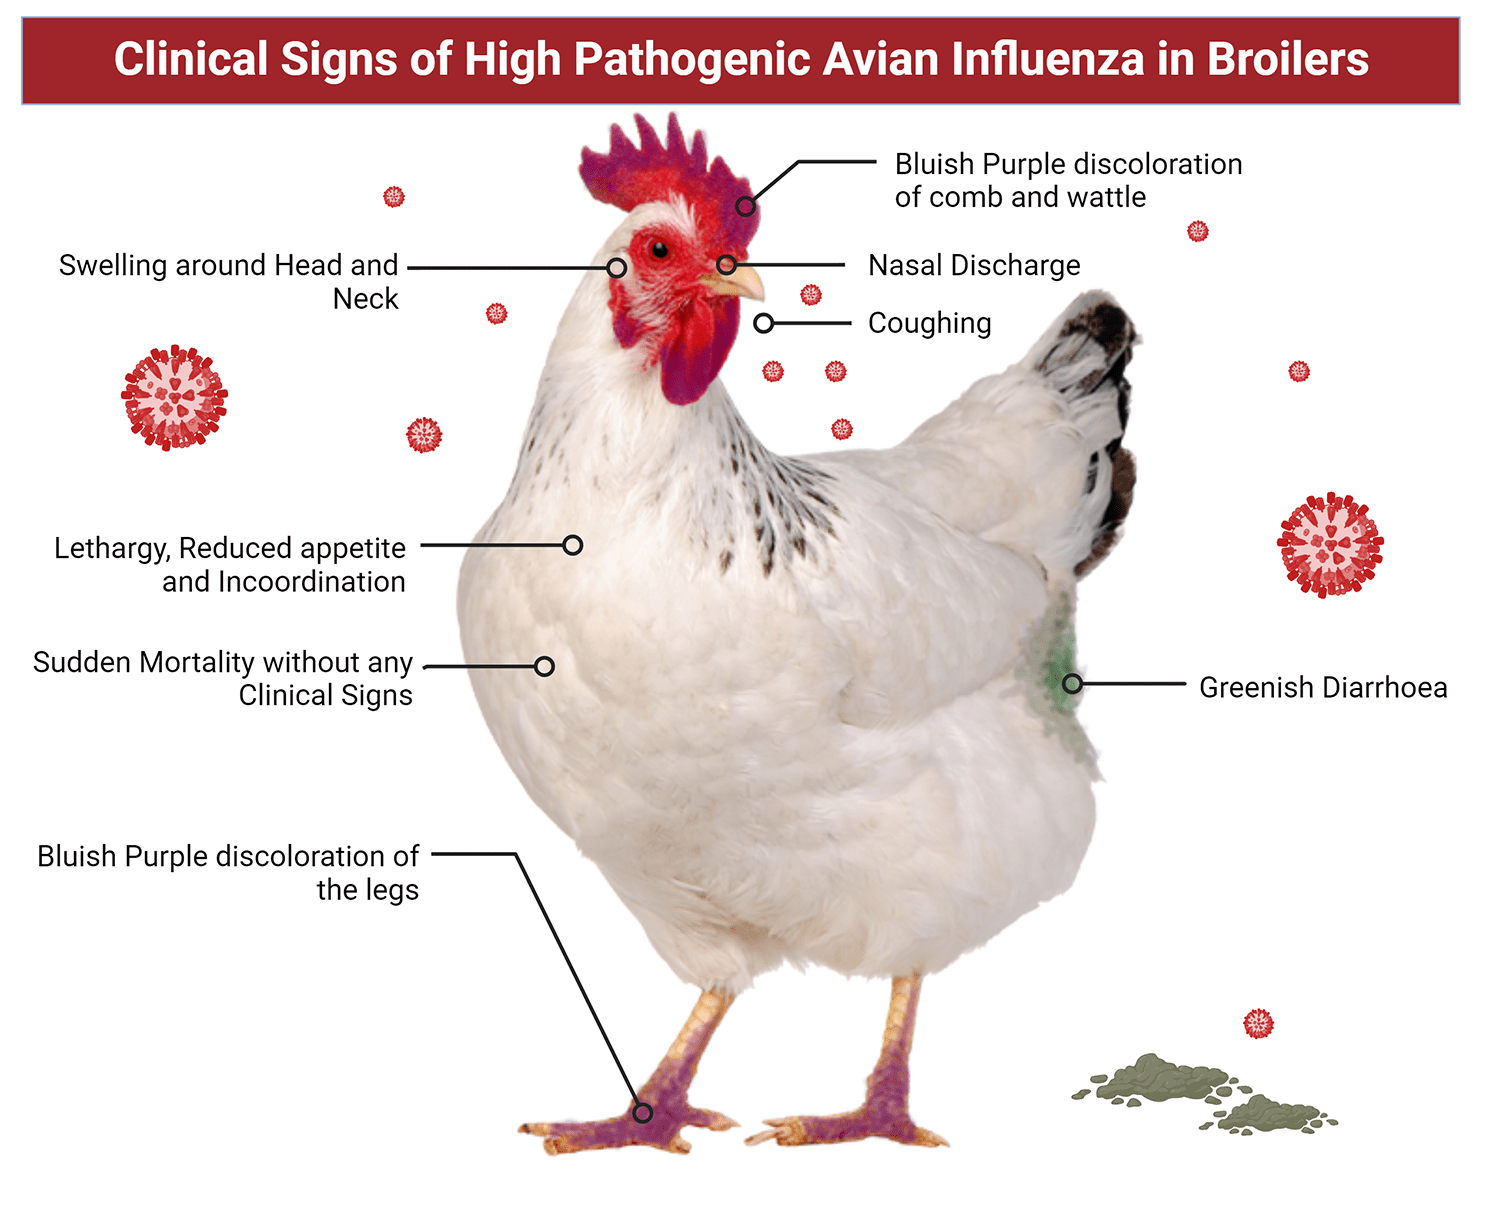 Image of a broiler chicken and related signs of Avian Influenza